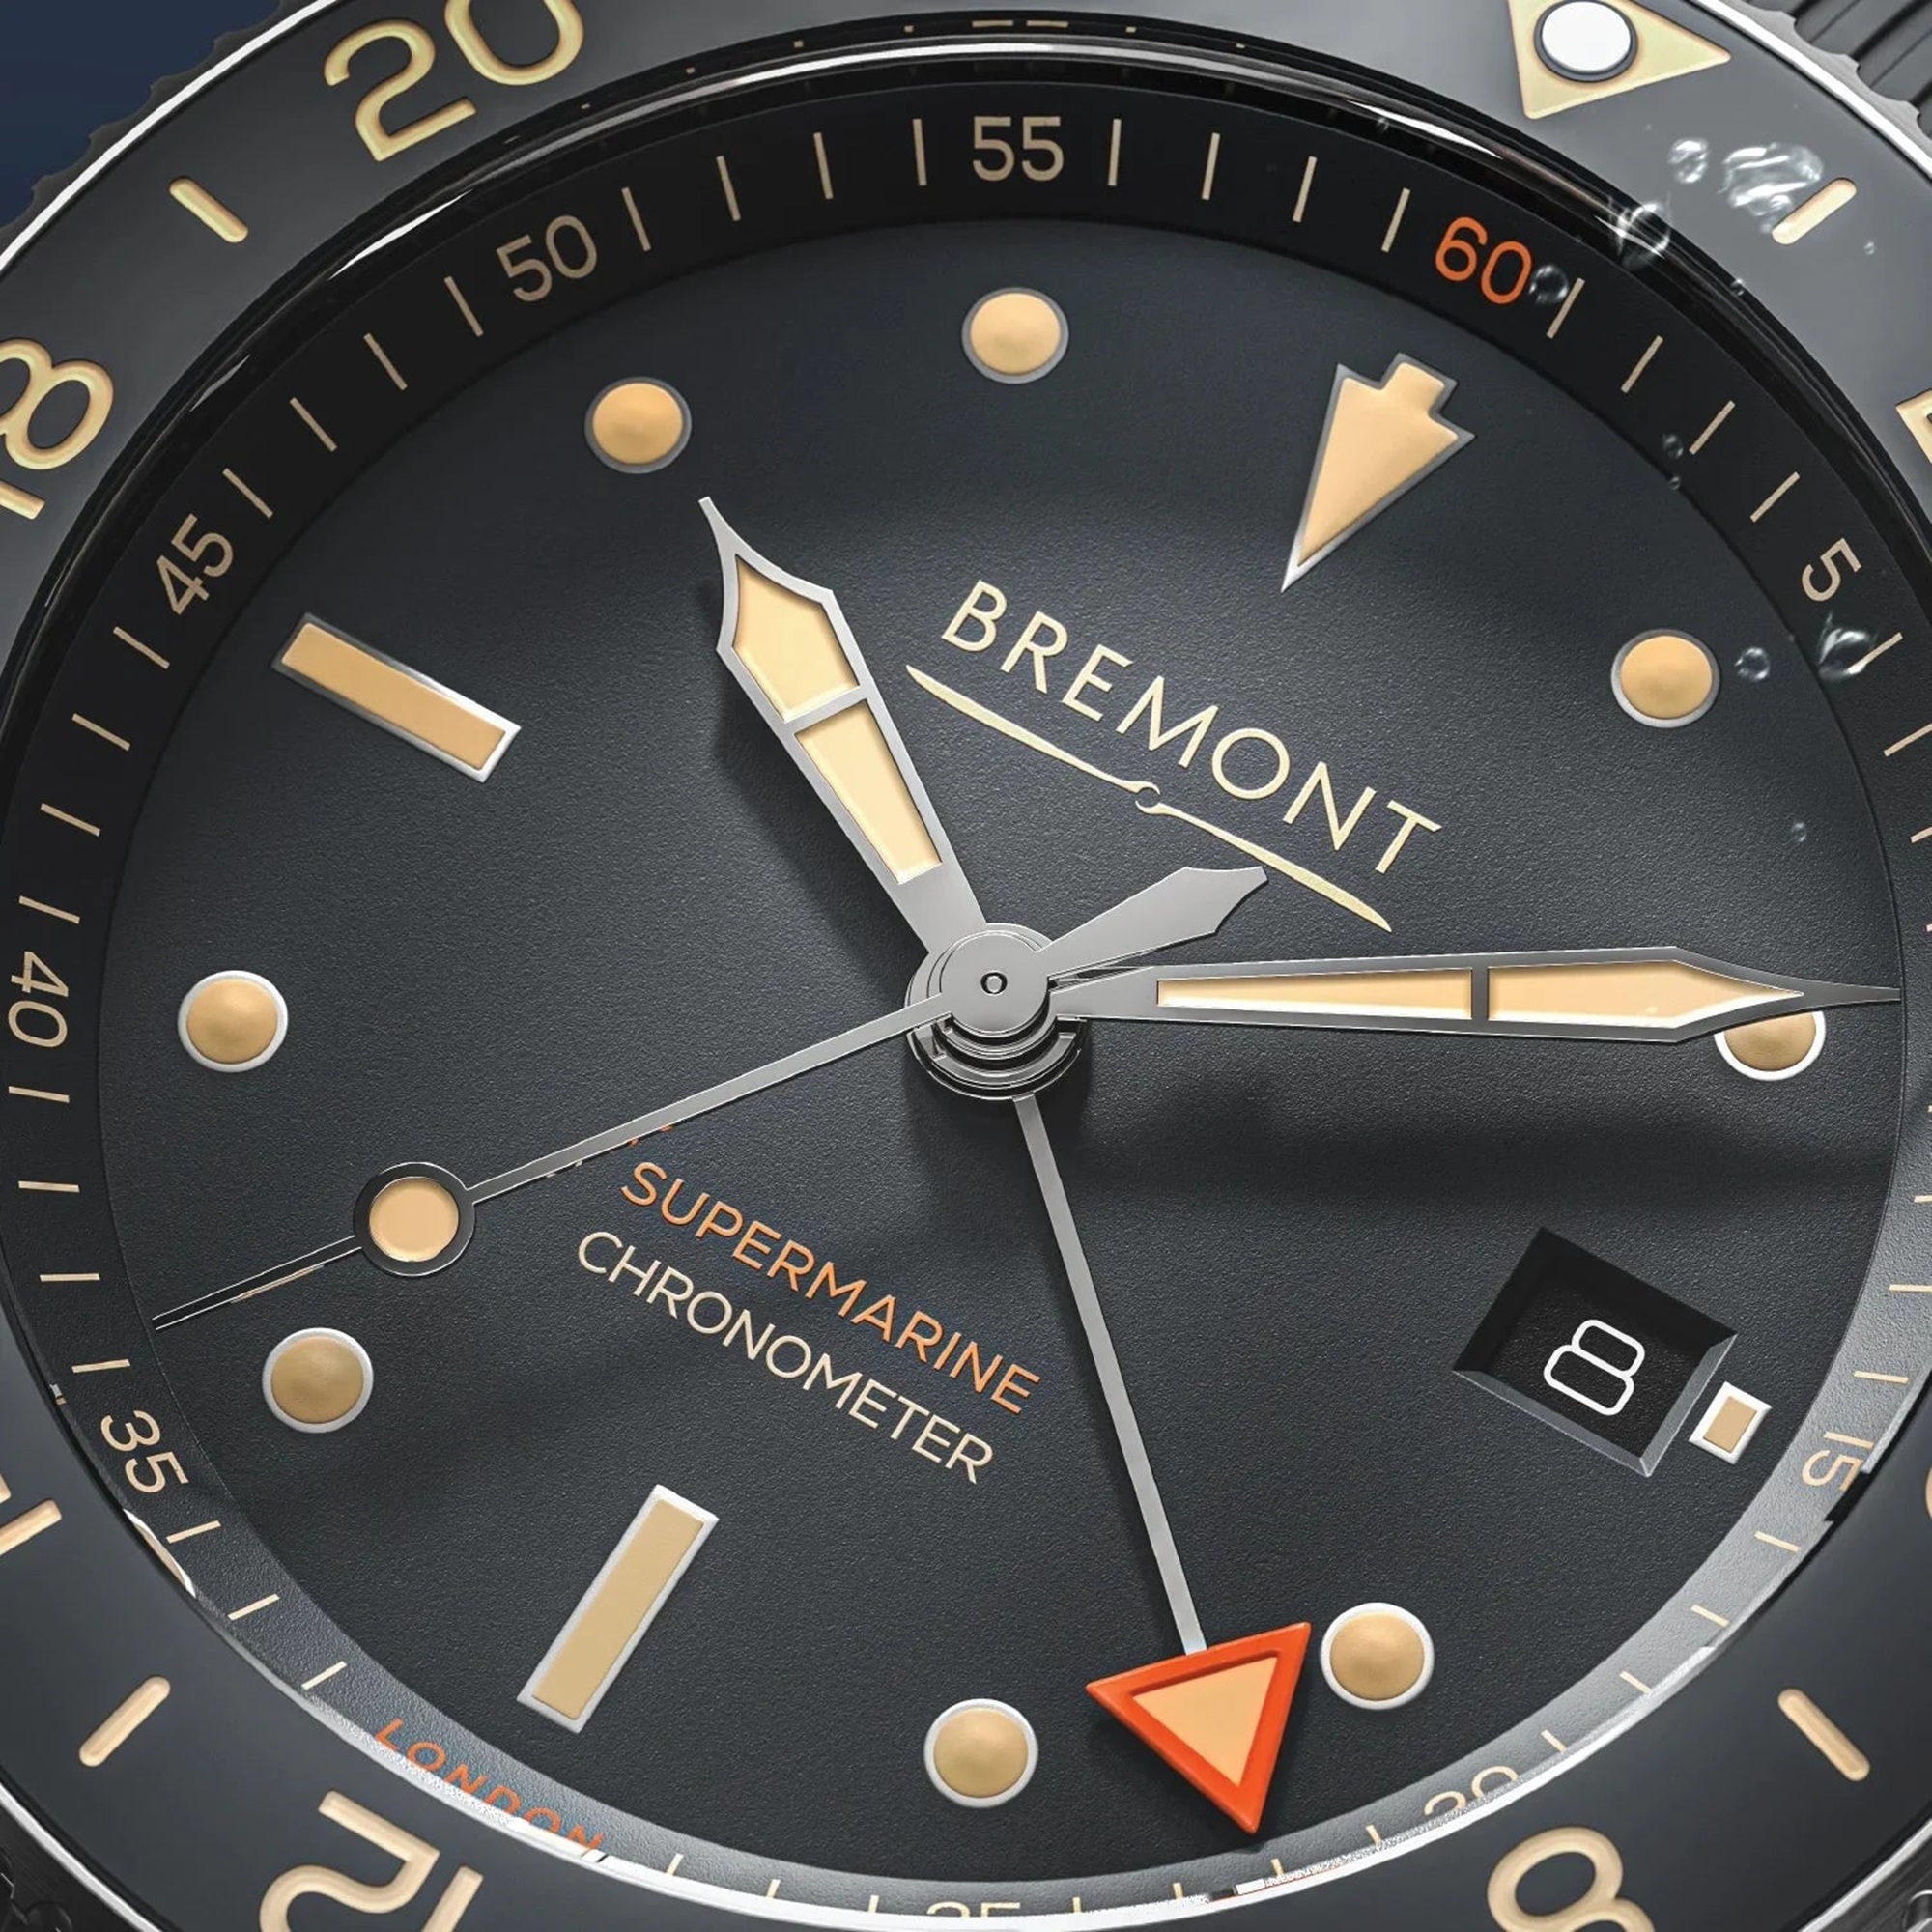 Bremont S302 Watch Review - 12&60